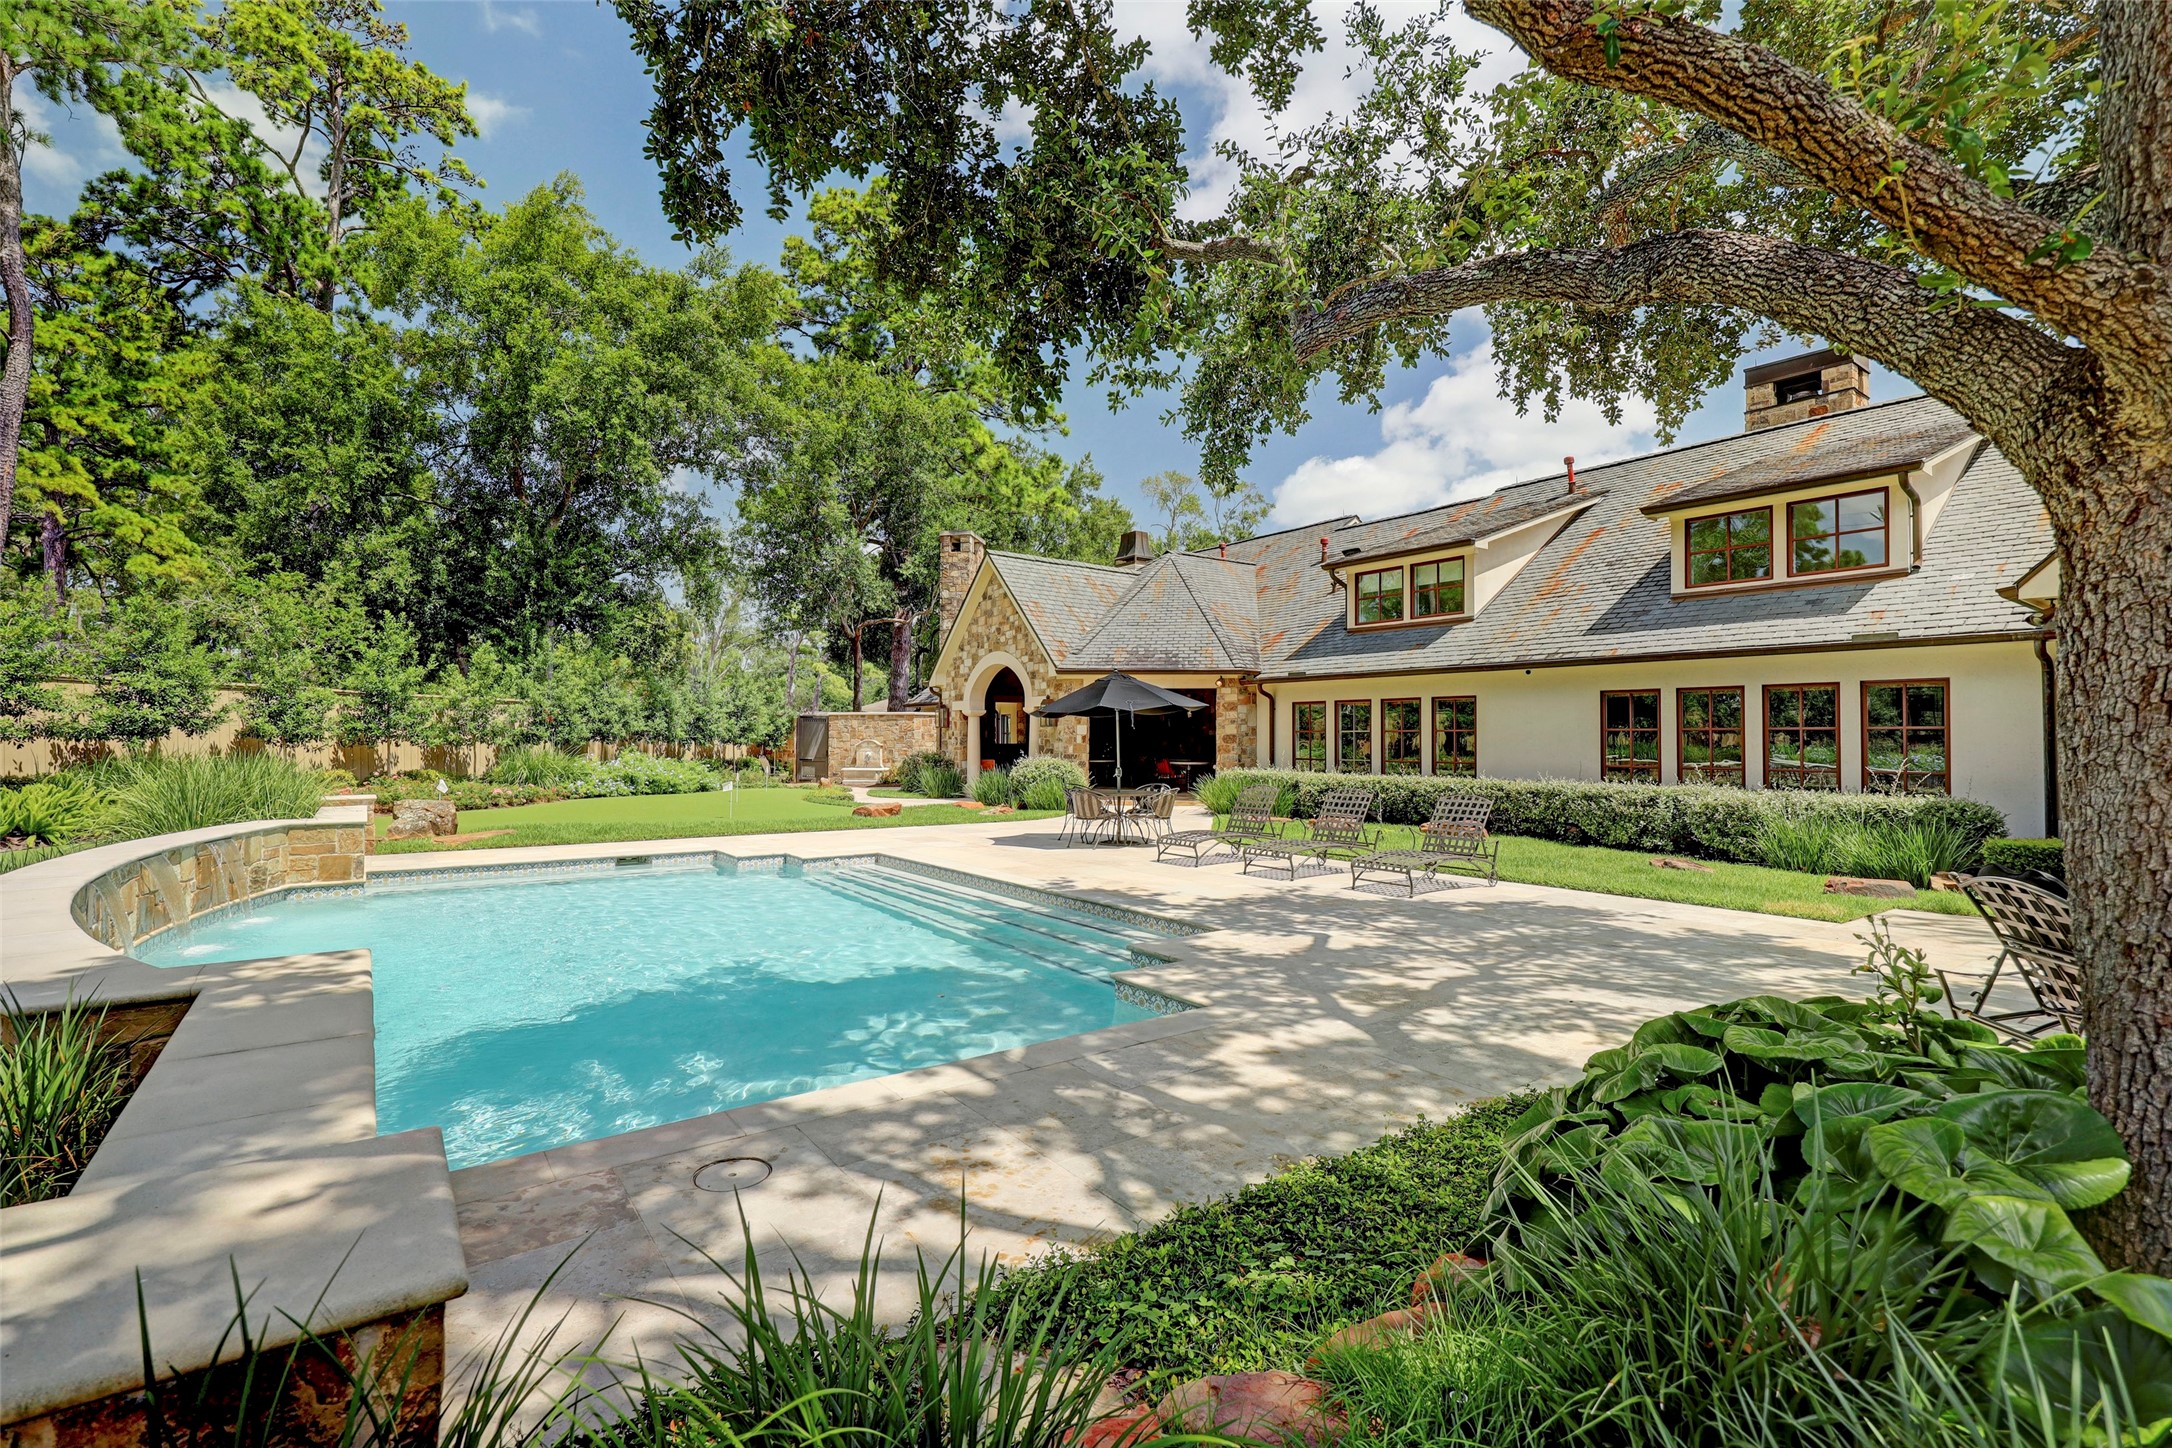 This end of the pool enjoys shade from the large oak tree.